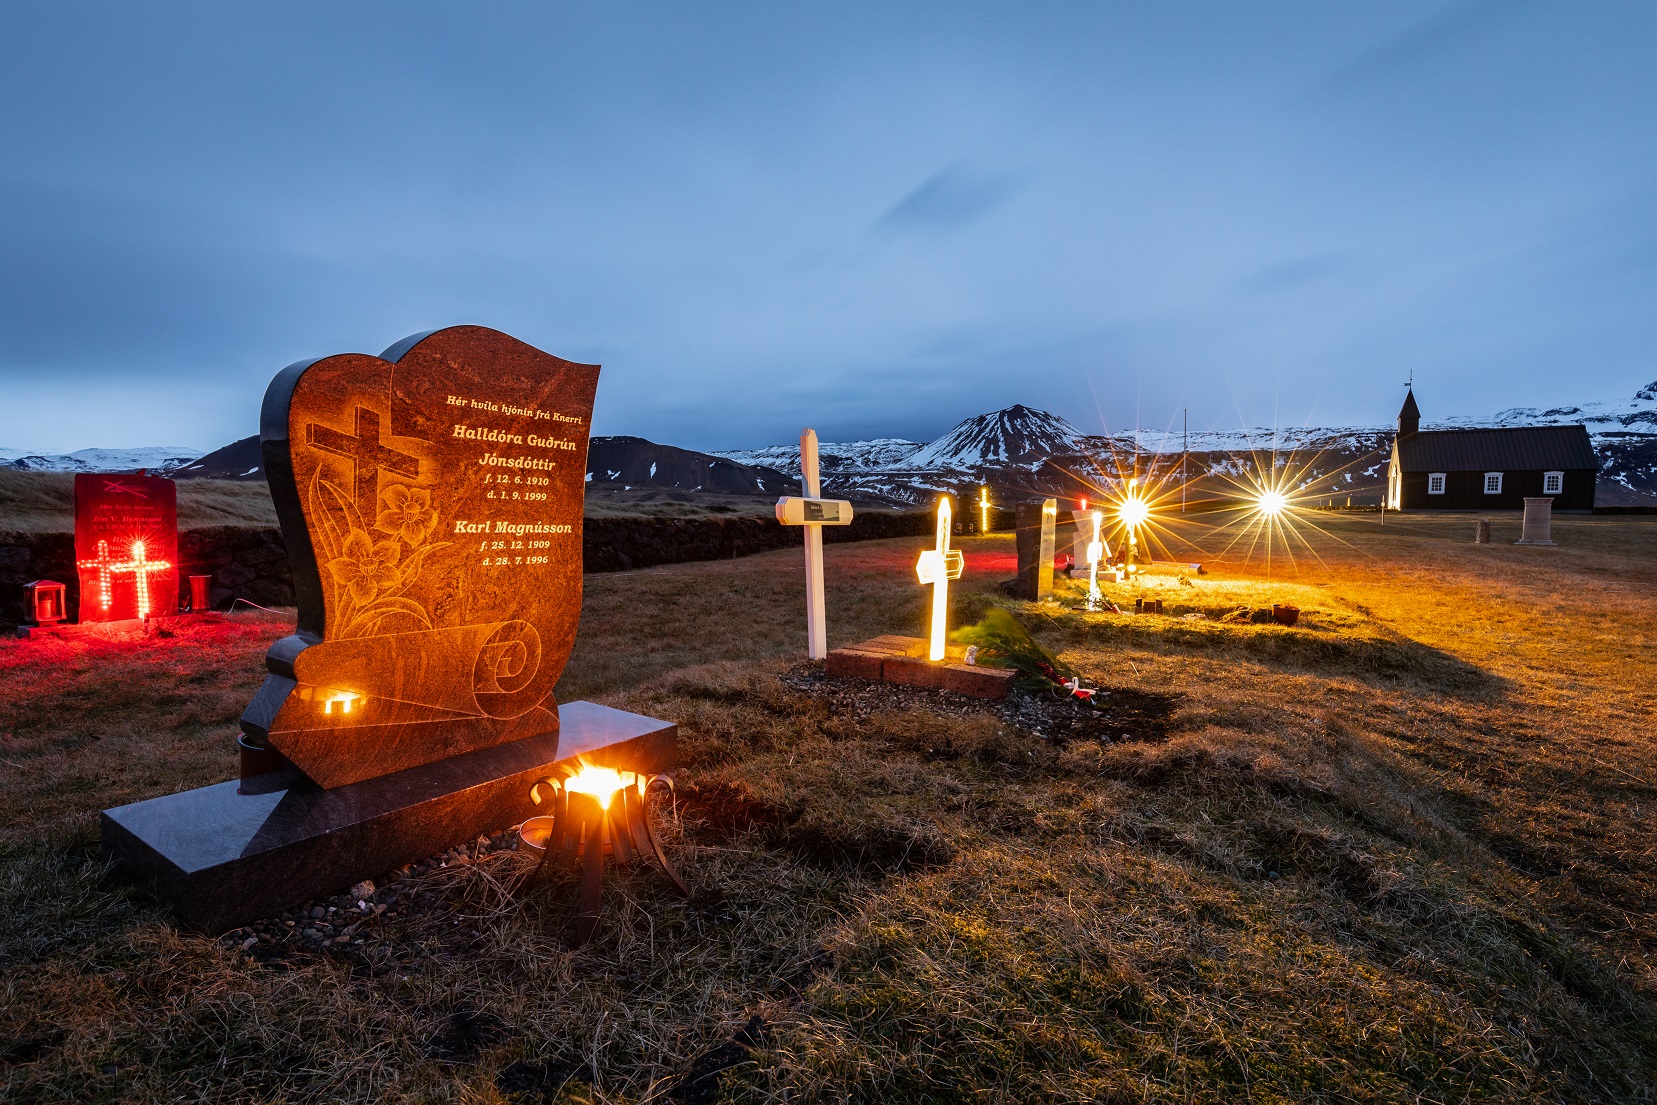 Icelandic Christmas tradition of decorating the cemetery with lights.